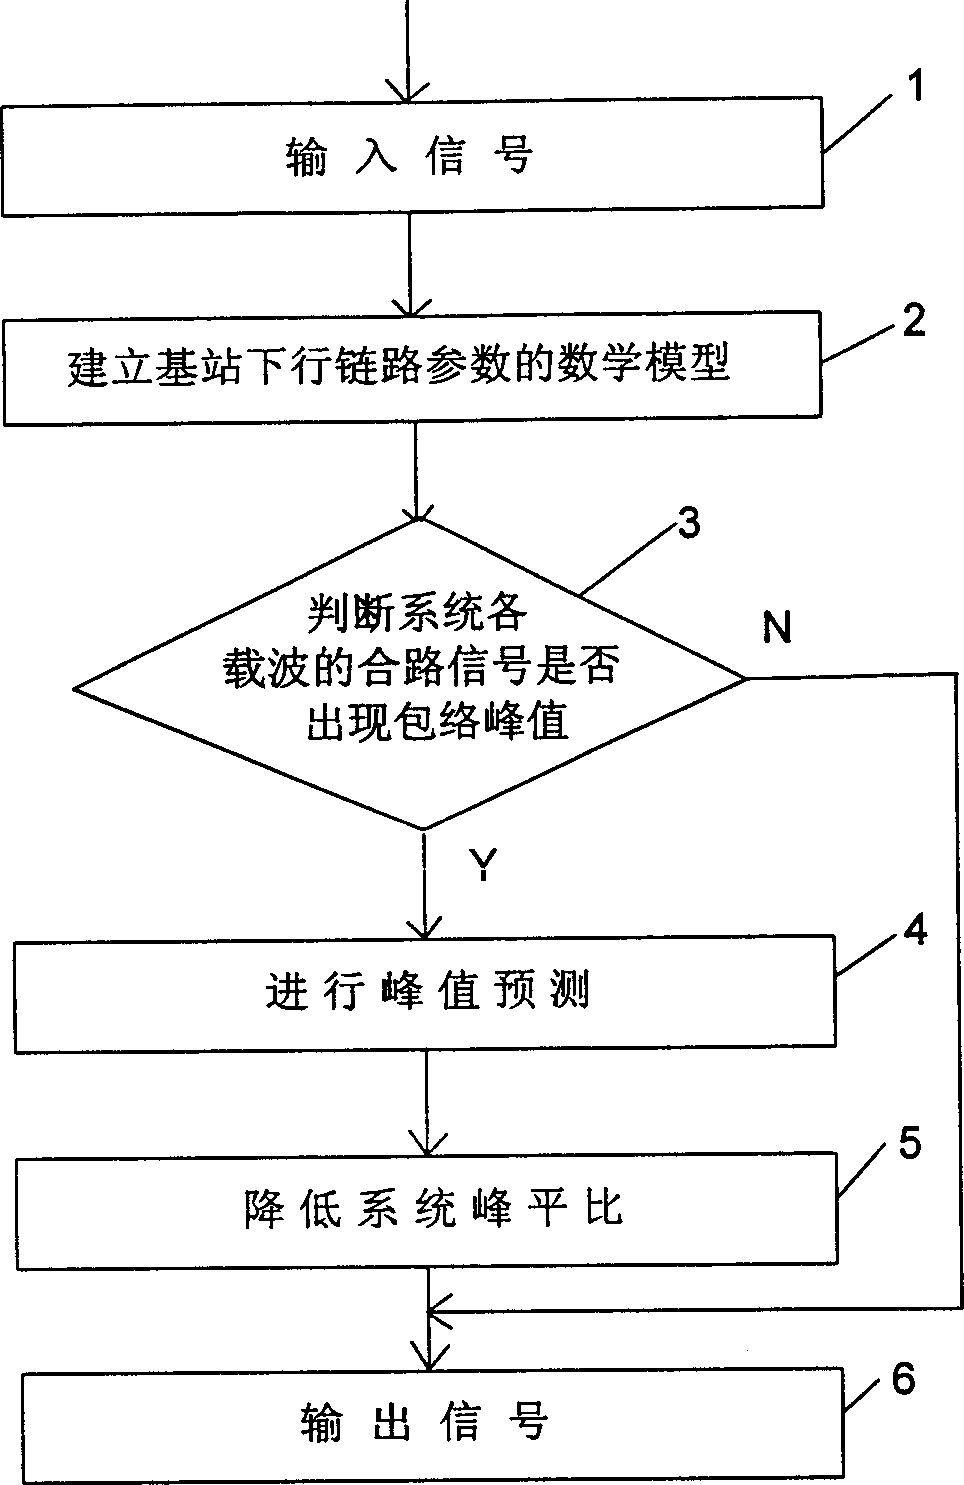 Peak power inhibiting method and device suitable for CDMA communication system